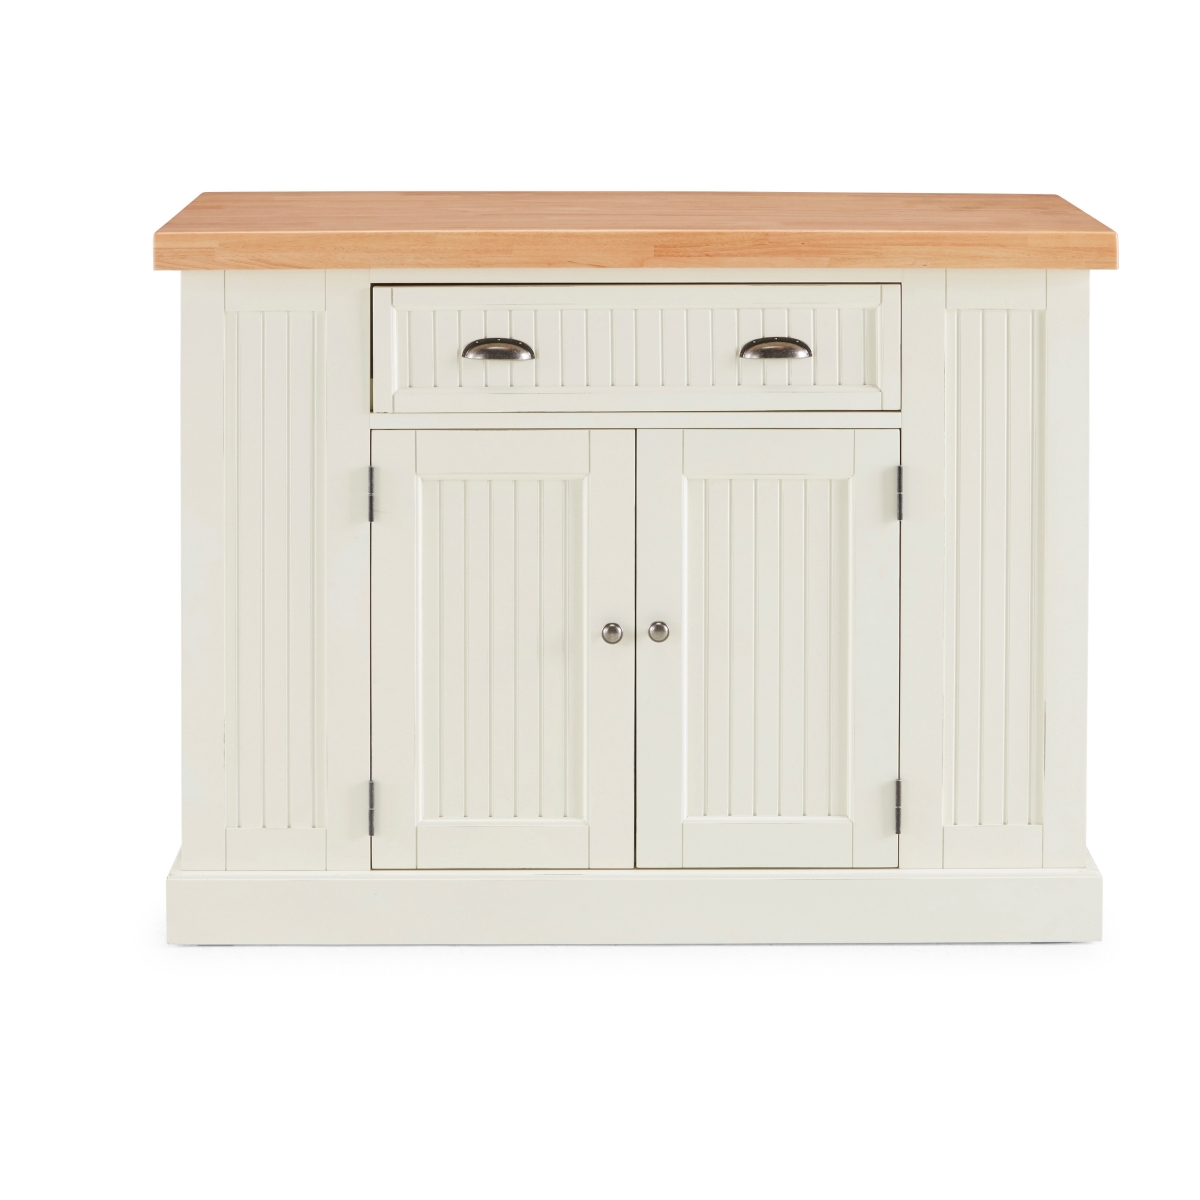 Picture of Homestyles 5022-94N Hartford Kitchen Island, Off-White - 36 x 48 x 26.25 in.